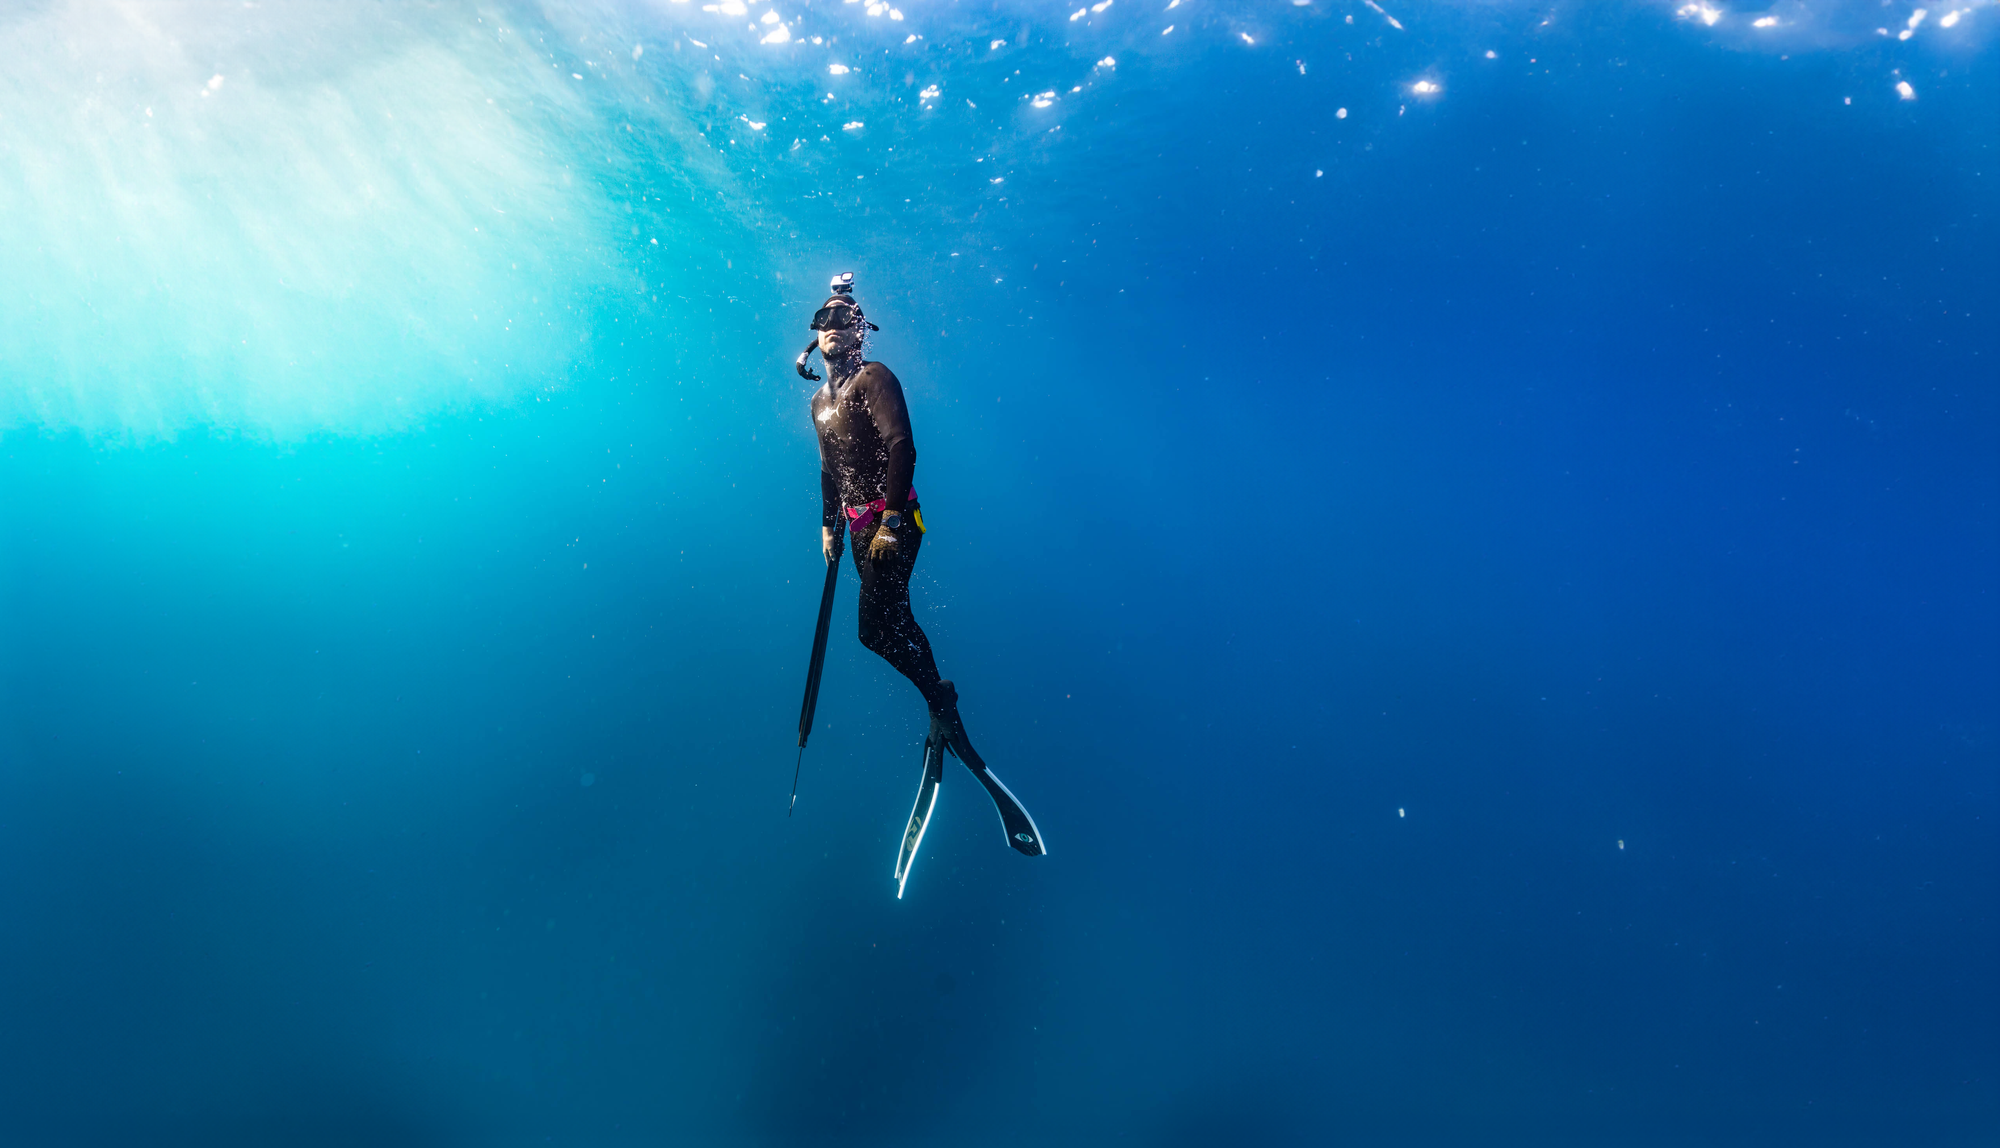 How to Avoid Calf Cramps While Spearfishing